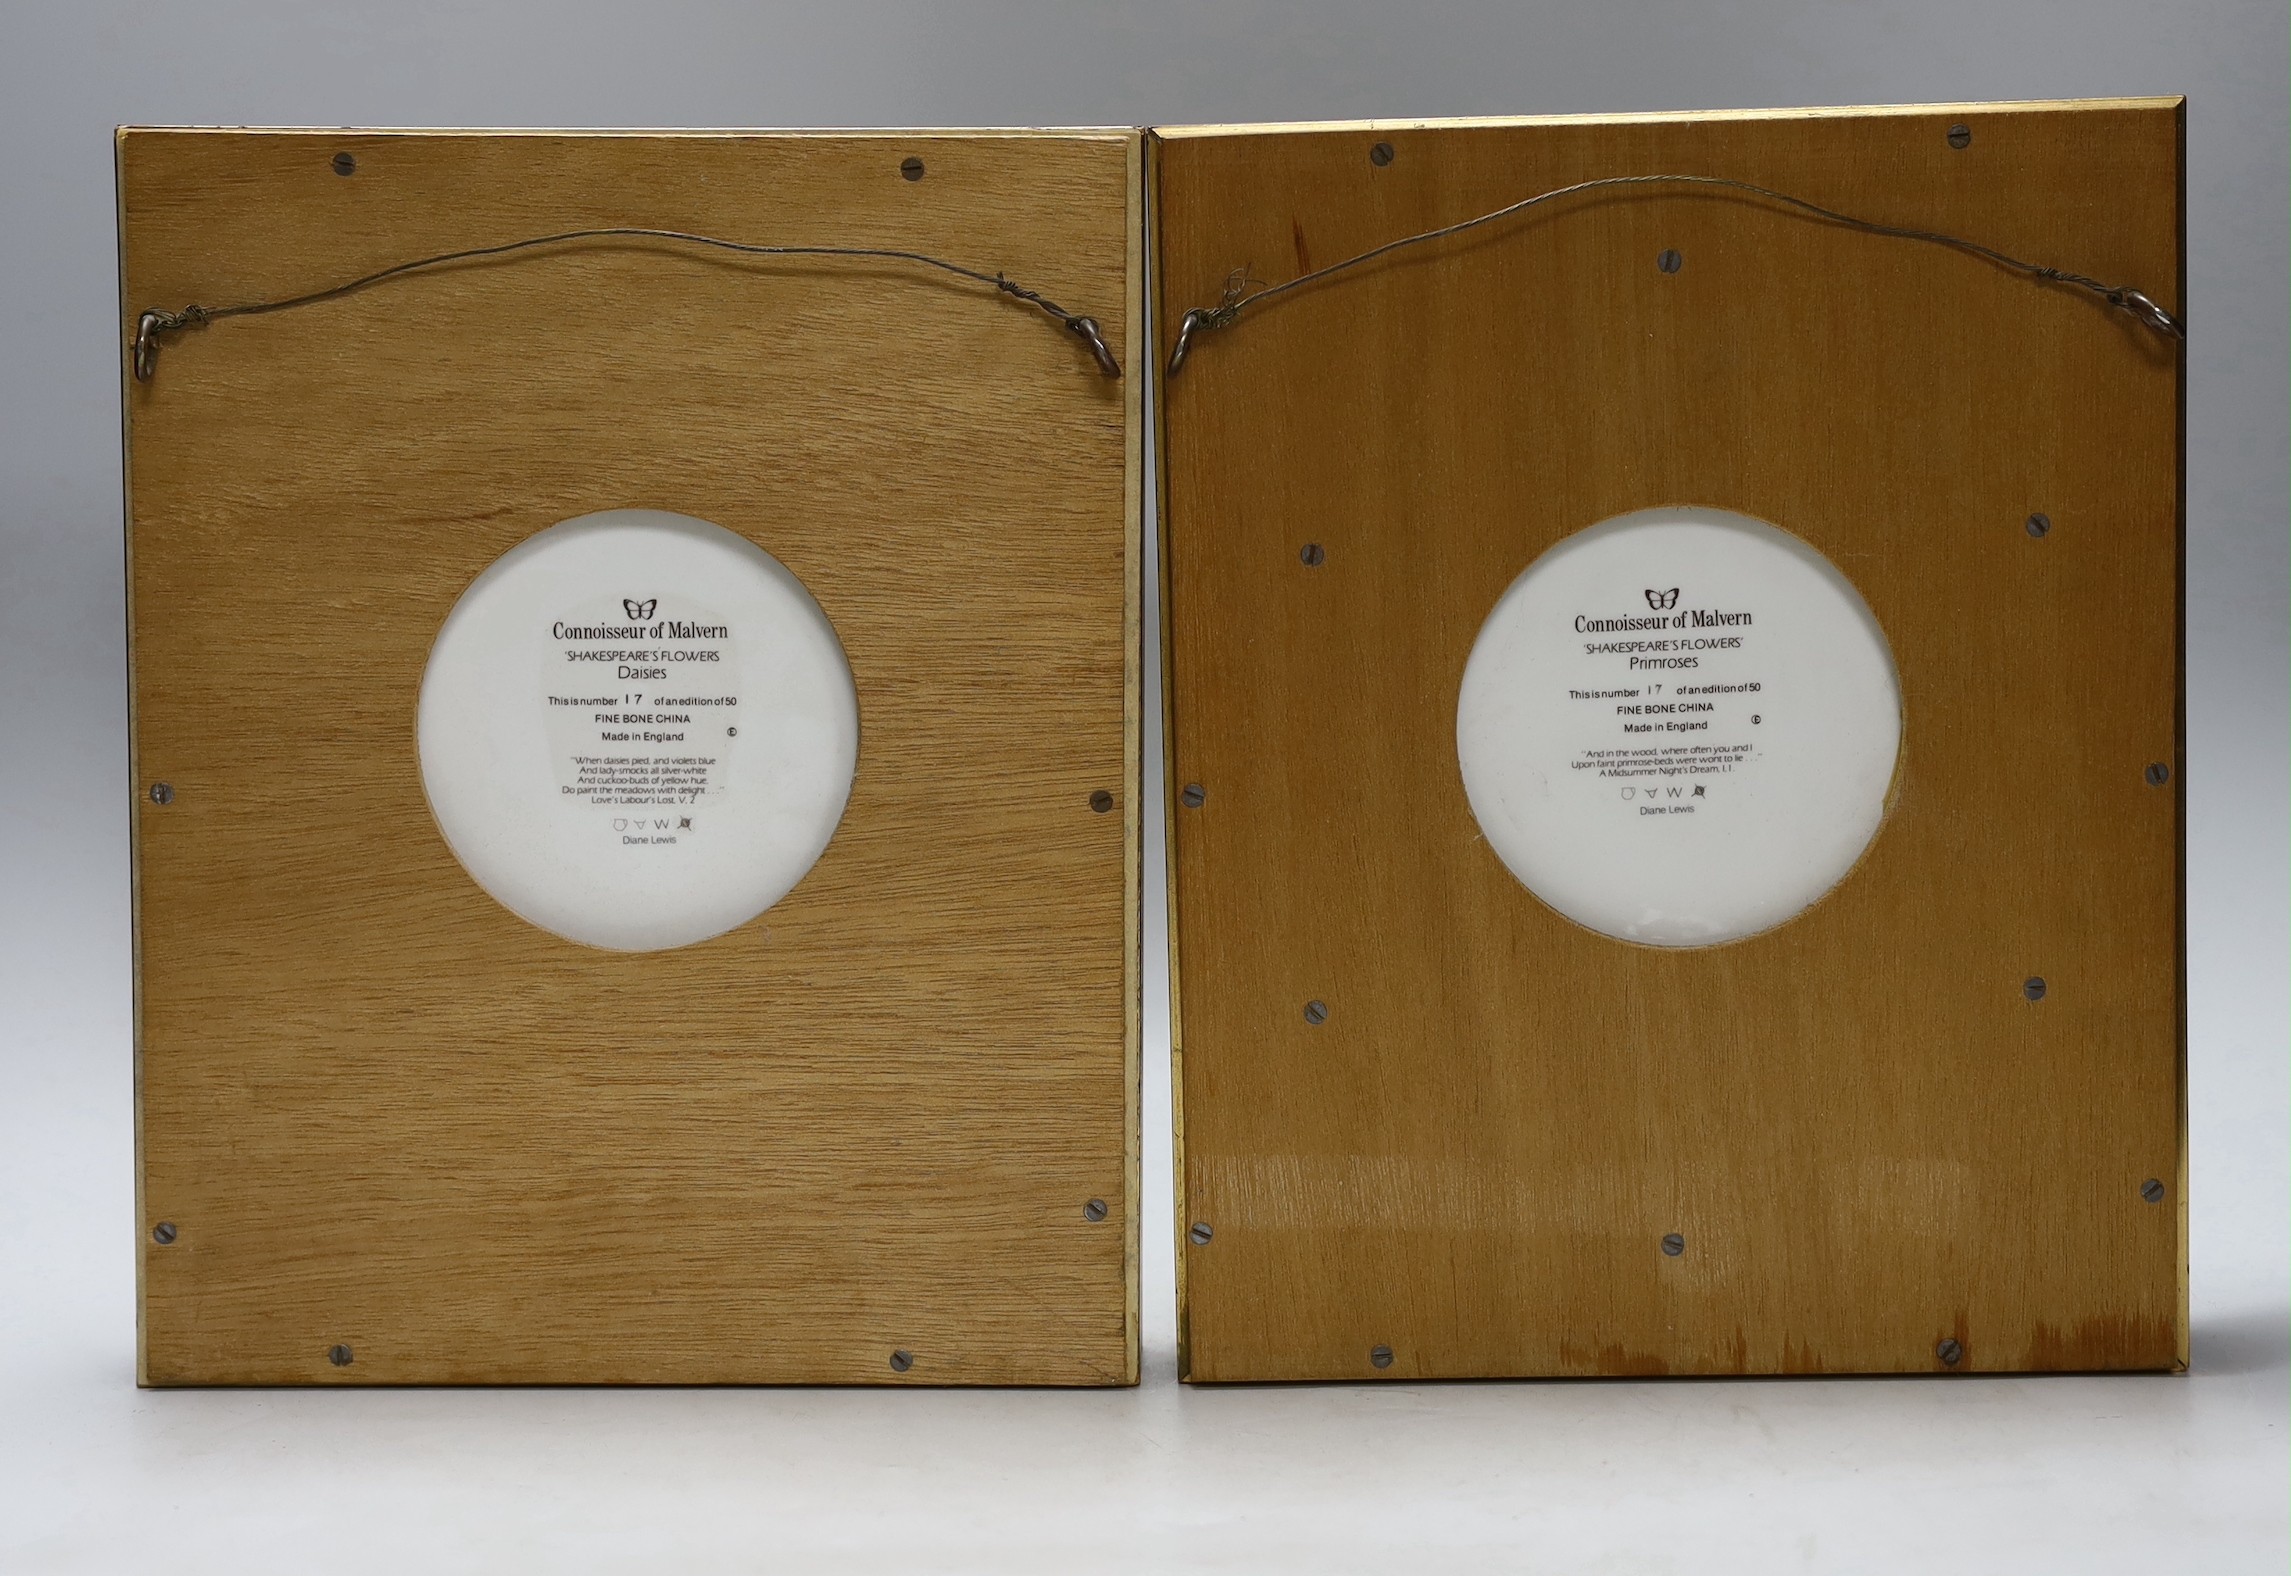 A pair of framed Connoisseur of Malvern, ‘Shakespeare’s Flower Daisies’, bone china plaques, 7cms wide, 11cms high